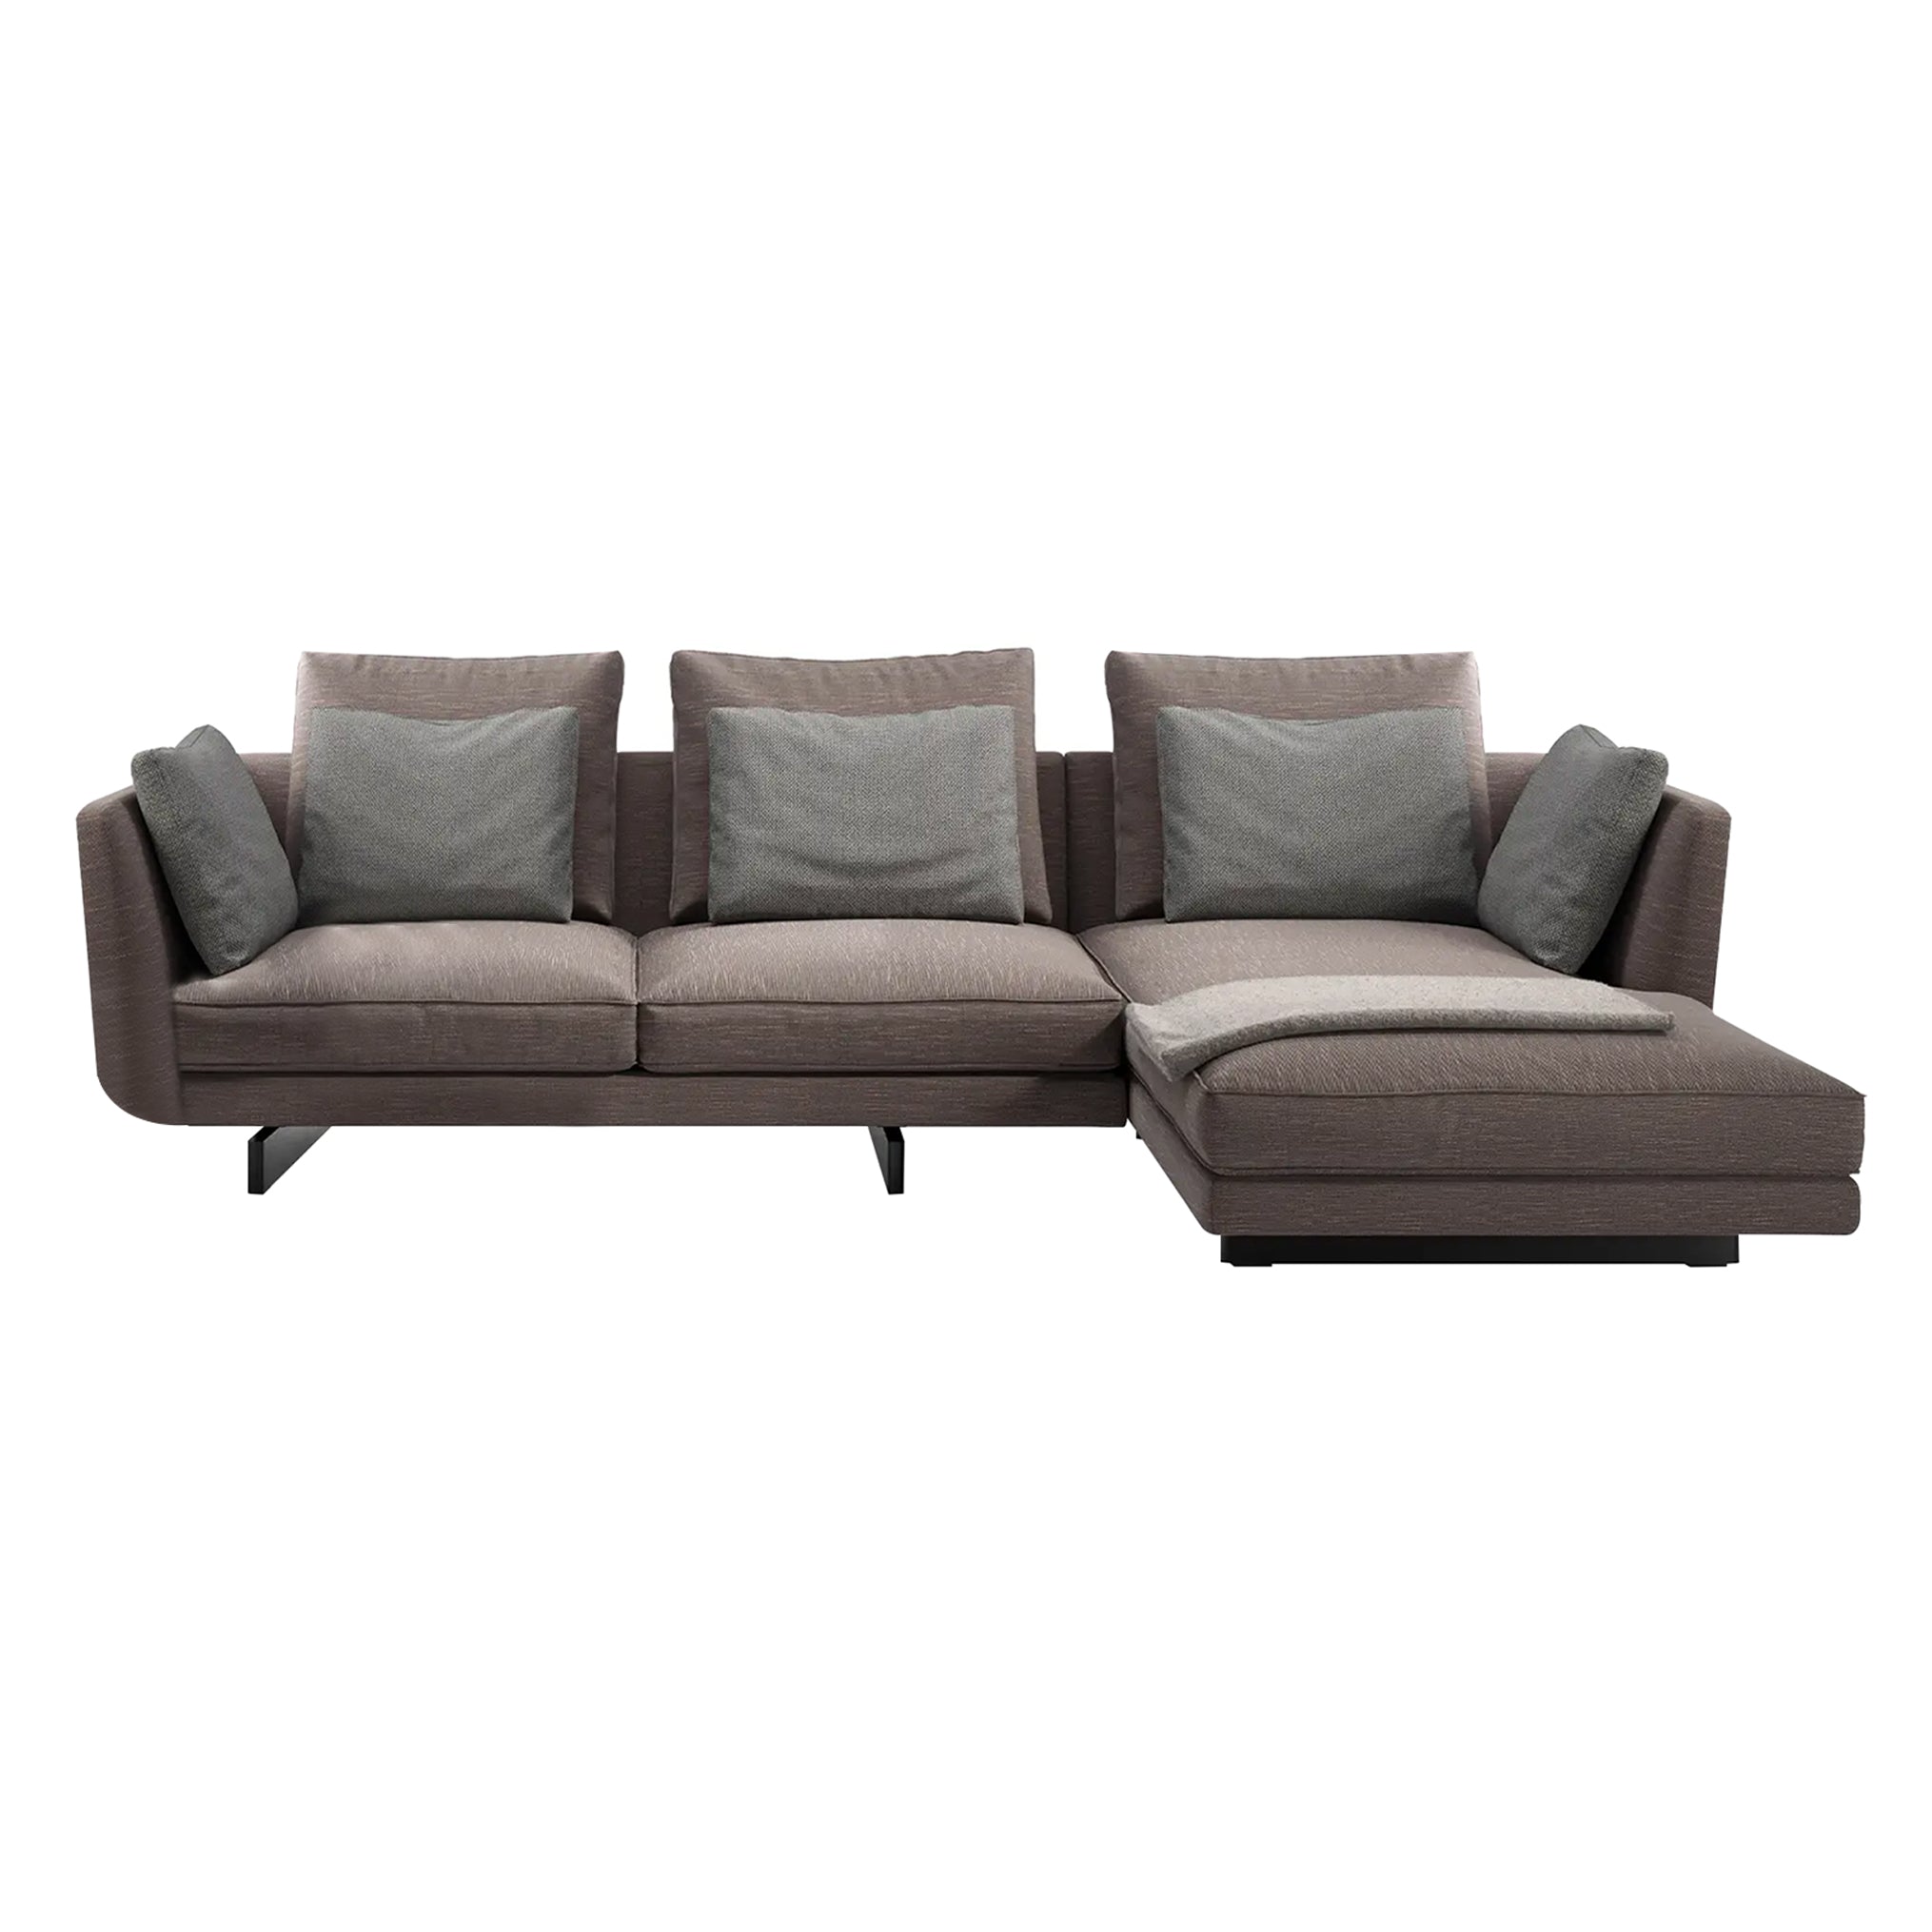 Savoy Sectional Sofa: Composition 1 + Right